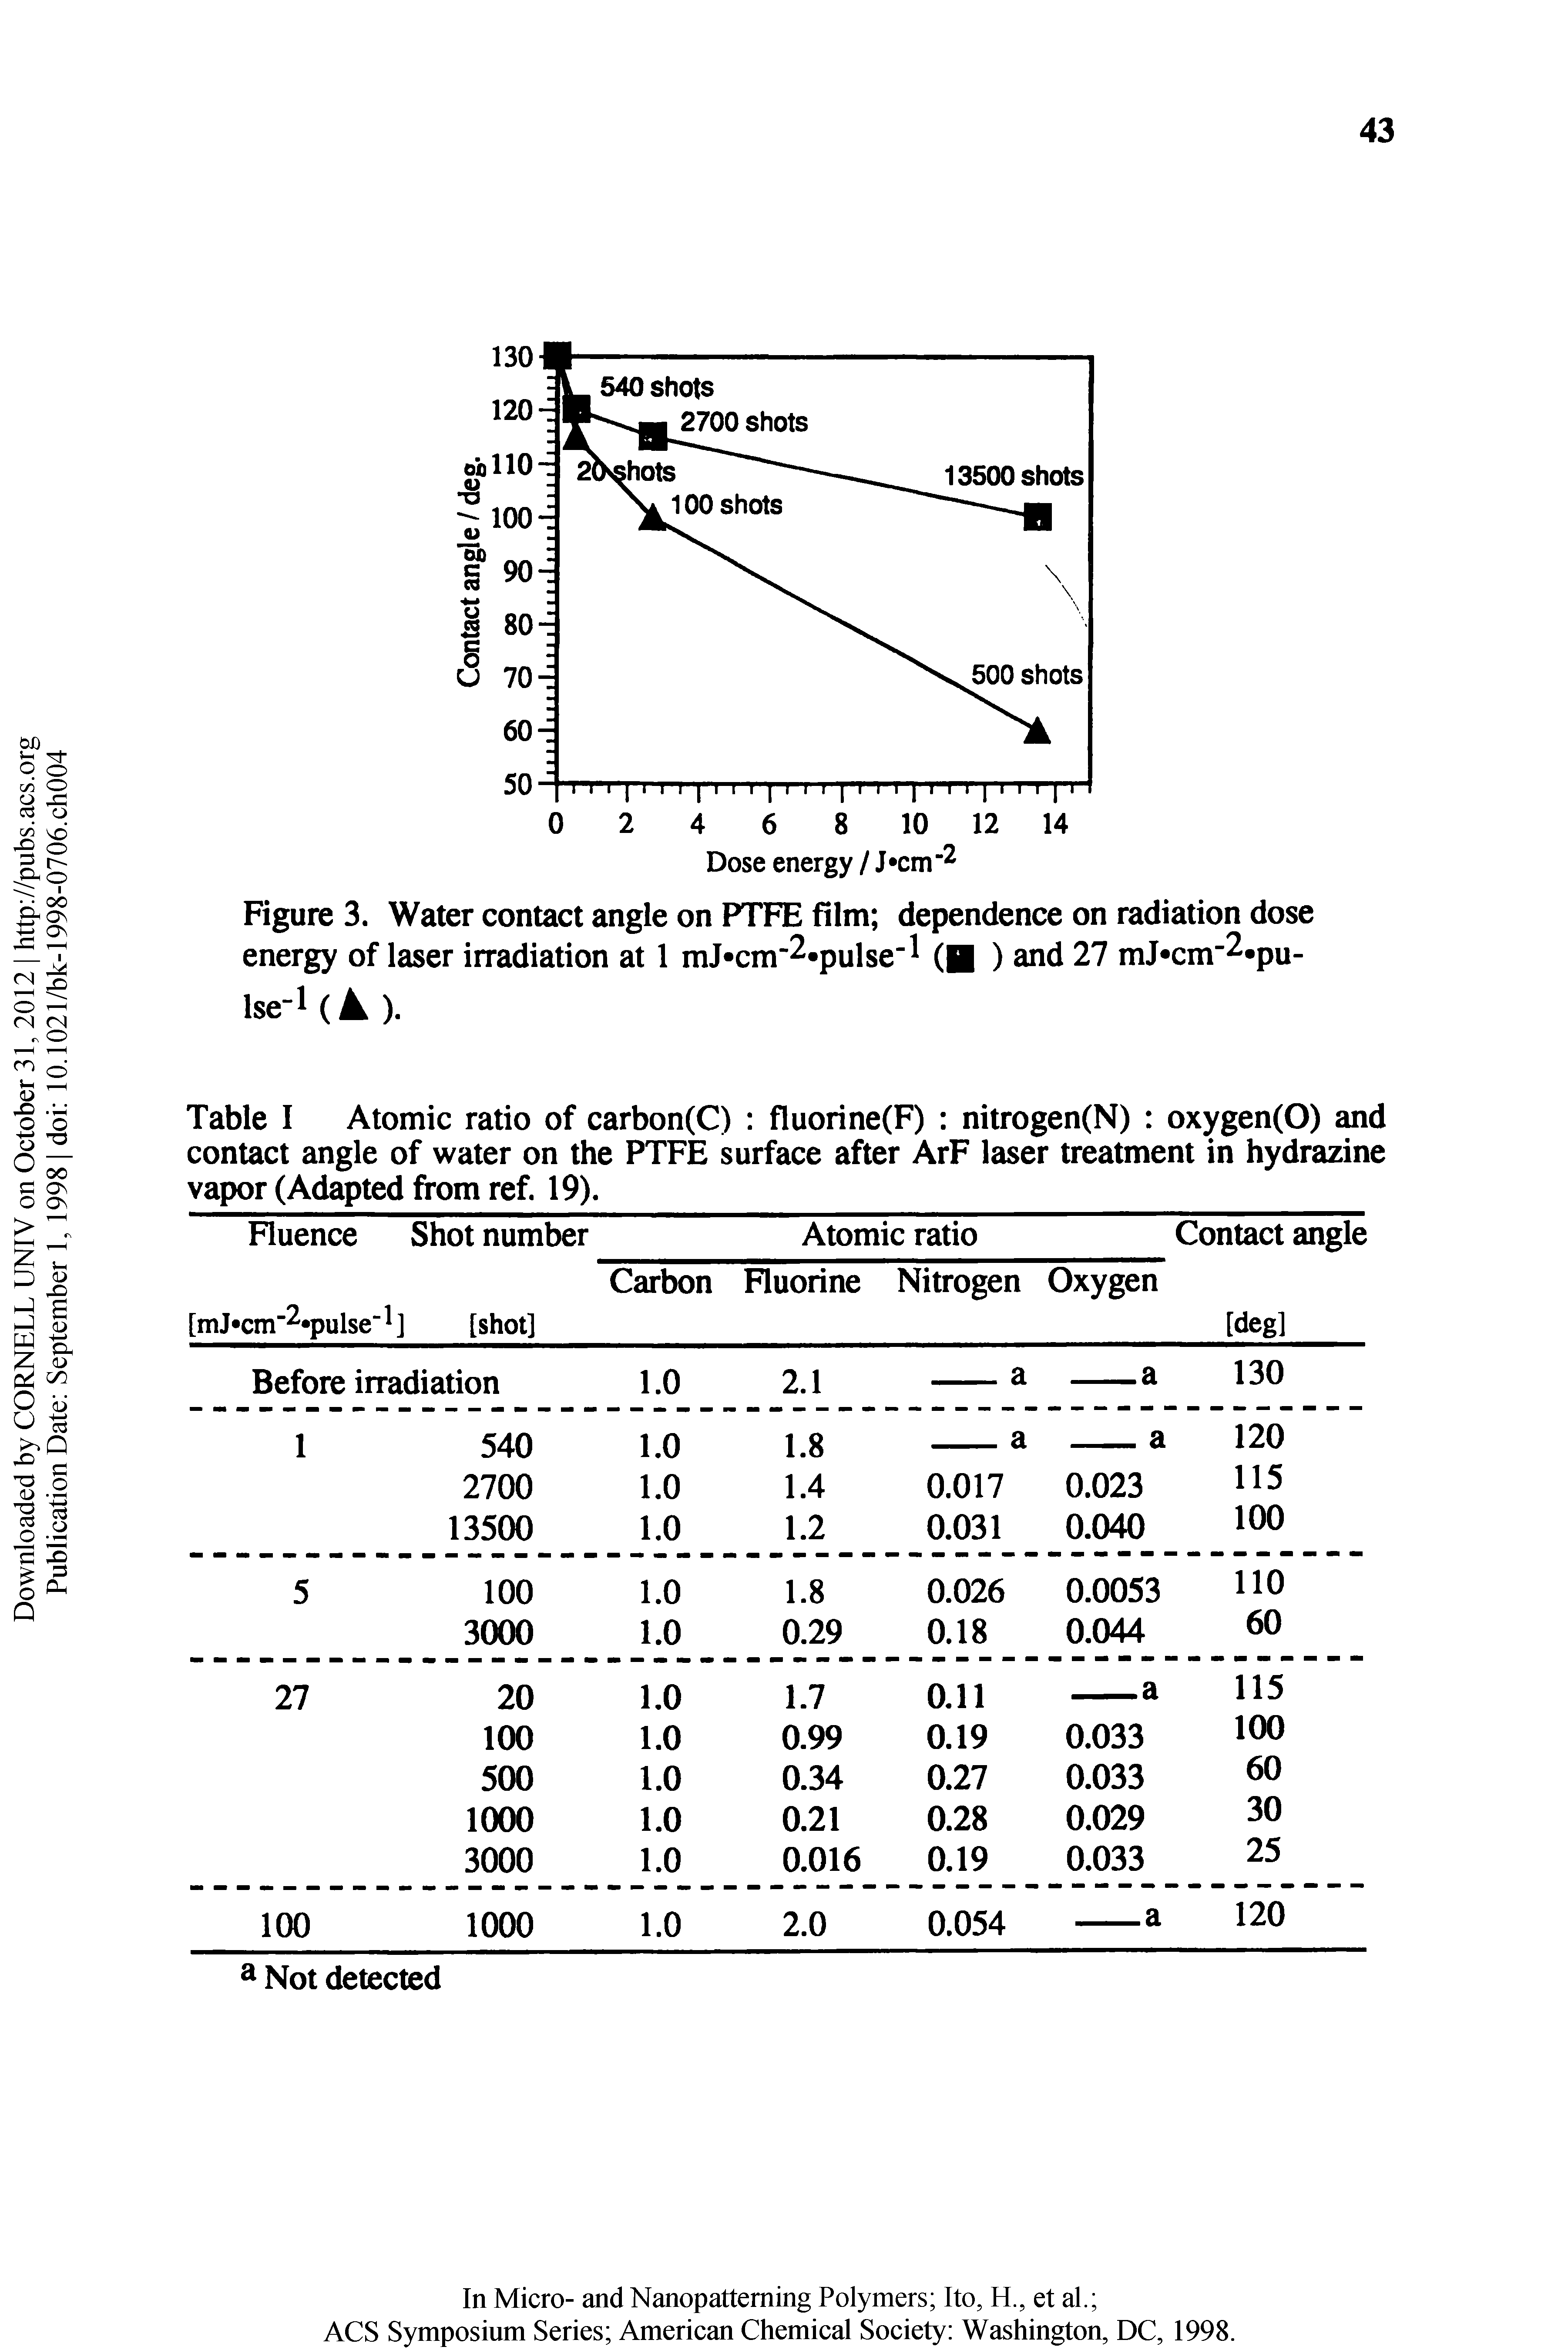 Table I Atomic ratio of carbon(C) fluorine(F) nitrogen(N) oxygen(O) and contact angle of water on the PTFE surface after ArF laser treatment in hydrazine vapor (Adapted from ref. 19).